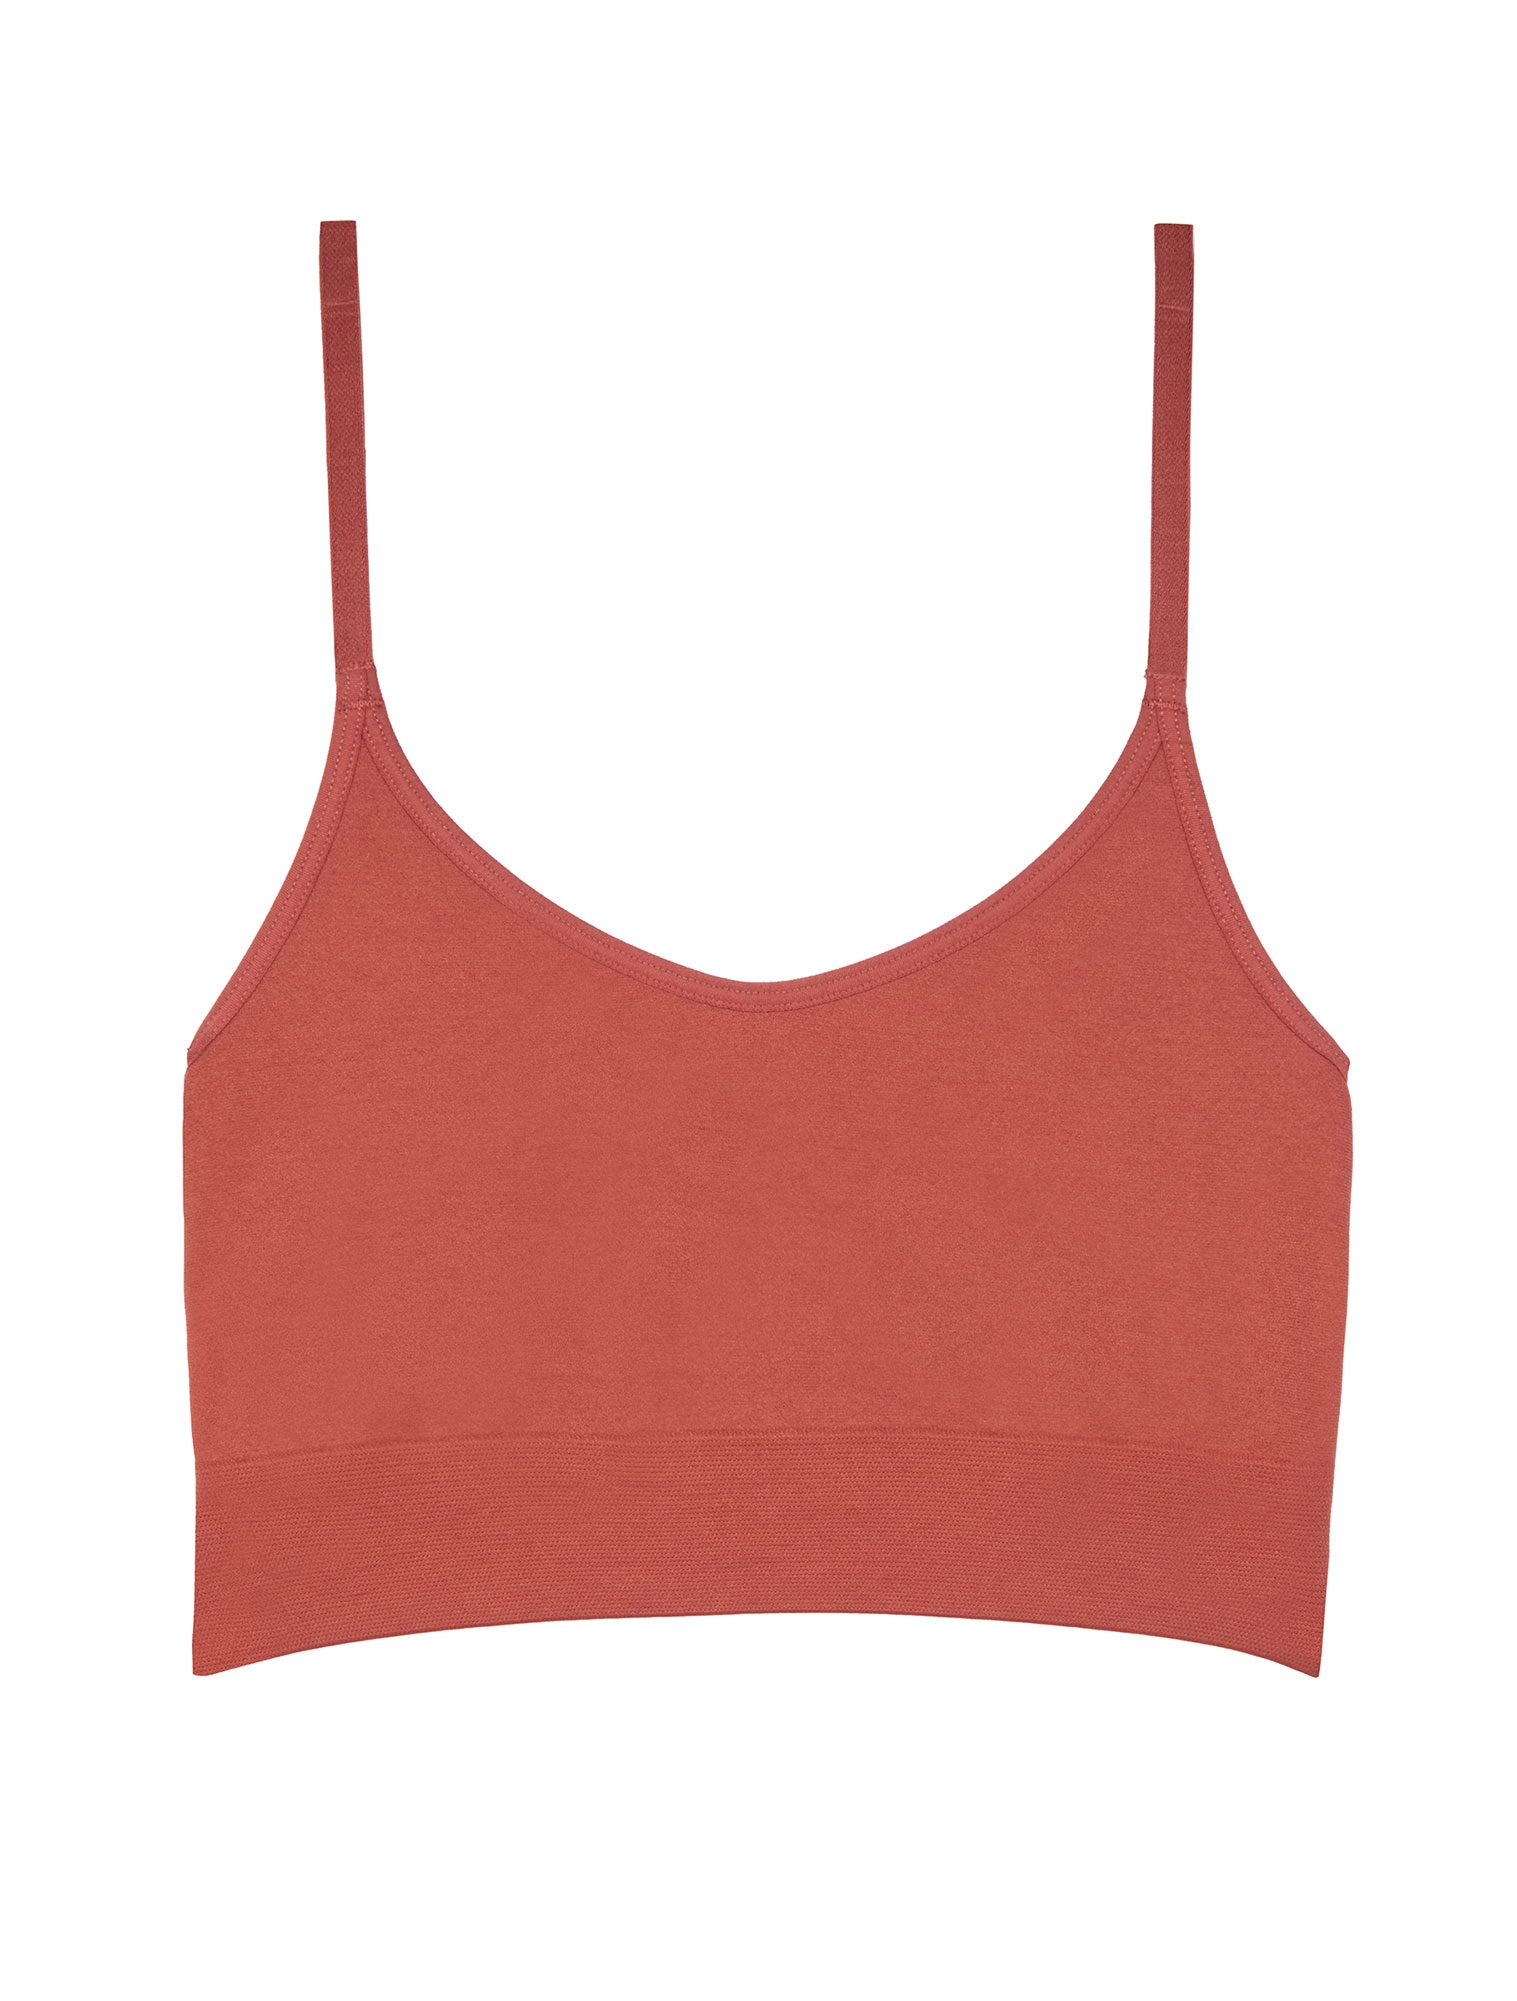 b.tempt'd by Wacoal Comfort Intended Bralette